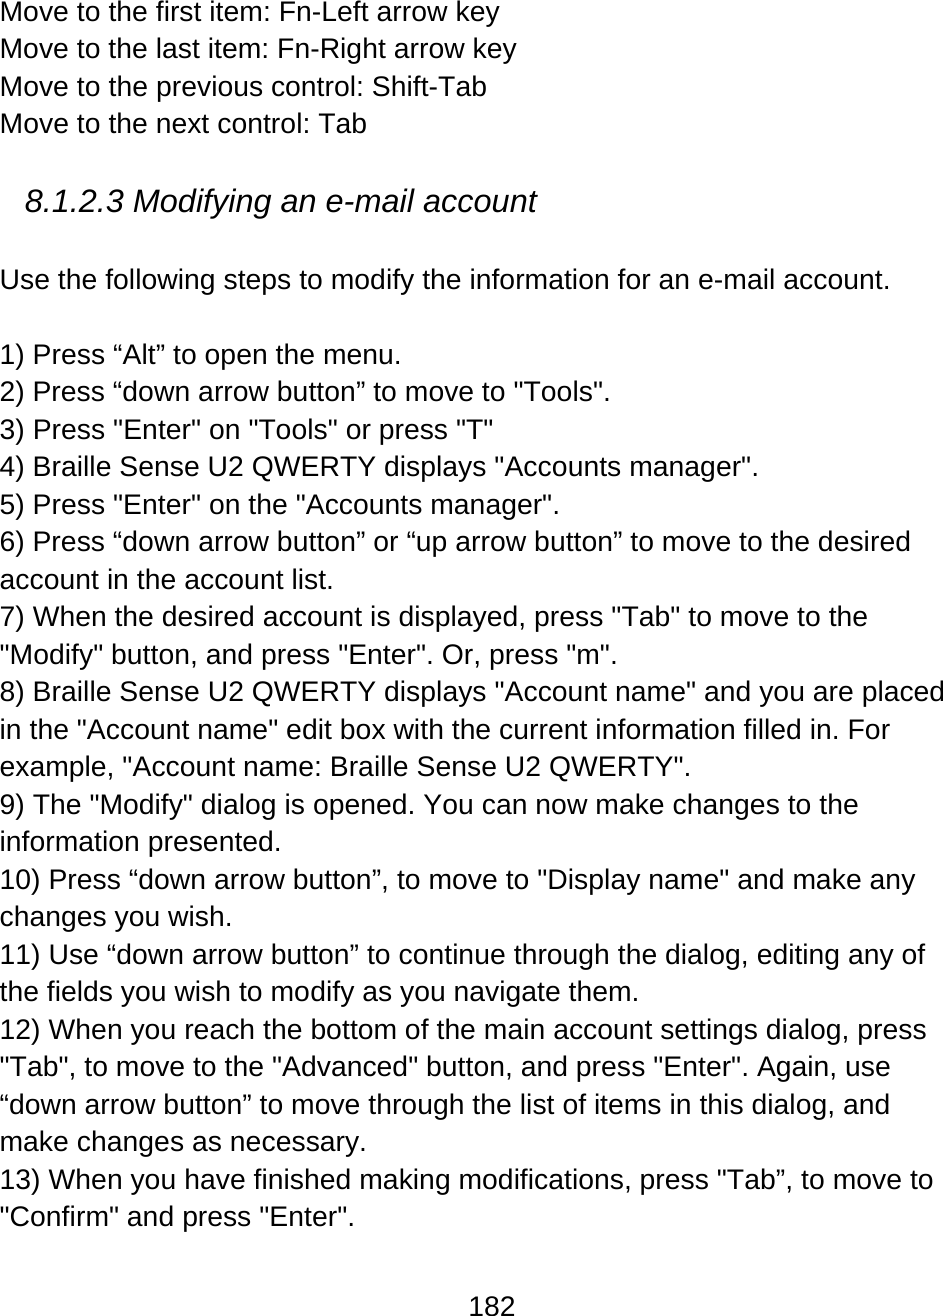 182  Move to the first item: Fn-Left arrow key Move to the last item: Fn-Right arrow key Move to the previous control: Shift-Tab Move to the next control: Tab  8.1.2.3 Modifying an e-mail account   Use the following steps to modify the information for an e-mail account.    1) Press “Alt” to open the menu. 2) Press “down arrow button” to move to &quot;Tools&quot;. 3) Press &quot;Enter&quot; on &quot;Tools&quot; or press &quot;T&quot; 4) Braille Sense U2 QWERTY displays &quot;Accounts manager&quot;. 5) Press &quot;Enter&quot; on the &quot;Accounts manager&quot;. 6) Press “down arrow button” or “up arrow button” to move to the desired account in the account list. 7) When the desired account is displayed, press &quot;Tab&quot; to move to the &quot;Modify&quot; button, and press &quot;Enter&quot;. Or, press &quot;m&quot;. 8) Braille Sense U2 QWERTY displays &quot;Account name&quot; and you are placed in the &quot;Account name&quot; edit box with the current information filled in. For example, &quot;Account name: Braille Sense U2 QWERTY&quot;. 9) The &quot;Modify&quot; dialog is opened. You can now make changes to the information presented.  10) Press “down arrow button”, to move to &quot;Display name&quot; and make any changes you wish.  11) Use “down arrow button” to continue through the dialog, editing any of the fields you wish to modify as you navigate them. 12) When you reach the bottom of the main account settings dialog, press &quot;Tab&quot;, to move to the &quot;Advanced&quot; button, and press &quot;Enter&quot;. Again, use “down arrow button” to move through the list of items in this dialog, and make changes as necessary. 13) When you have finished making modifications, press &quot;Tab”, to move to &quot;Confirm&quot; and press &quot;Enter&quot;. 